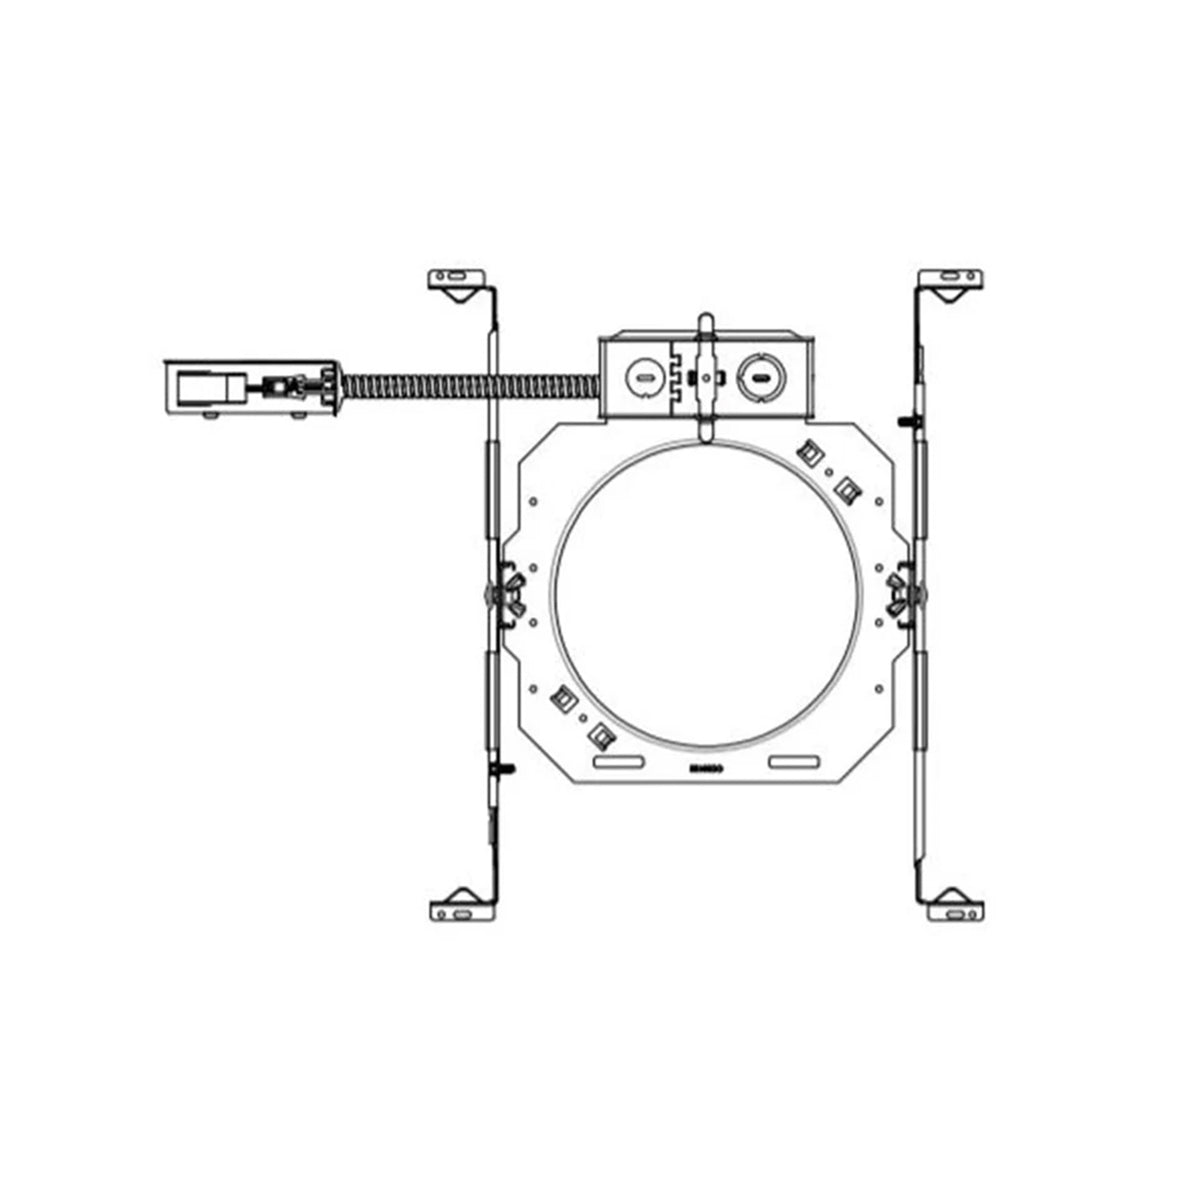 LBR 6 in. Round Plaster Frame with J-box and 18" Conduit and Quick Disconnect